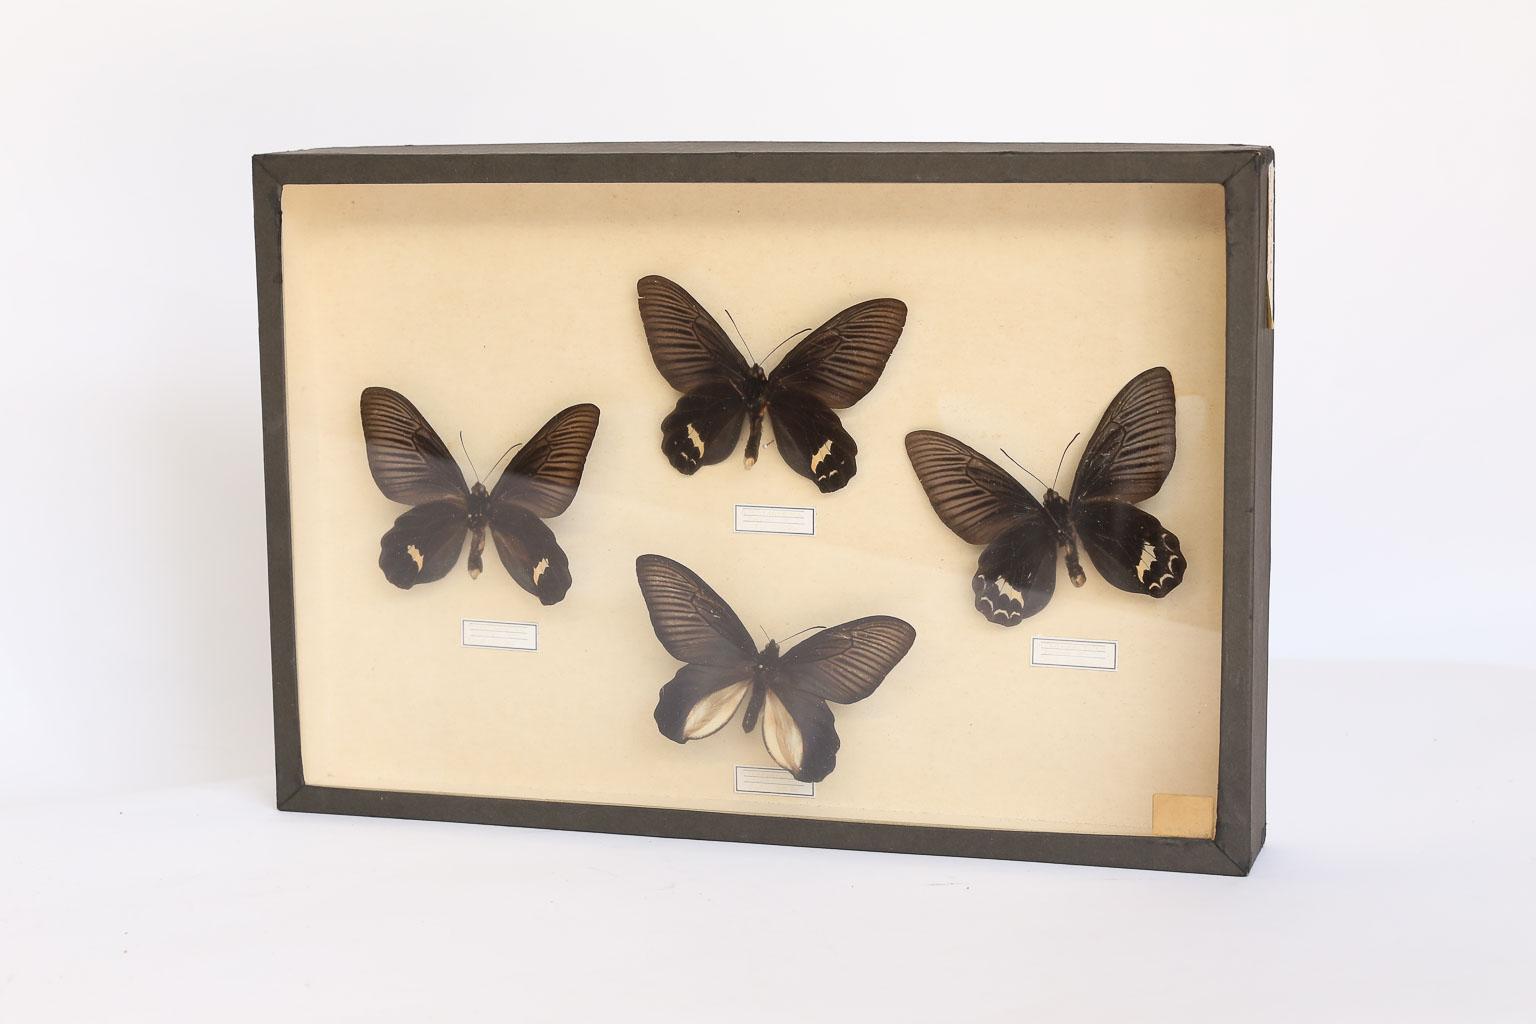 Found in France, this is a lovely butterfly study with four butterflies mounted in a shadow box. Written on the side of the box is the name Atrophaneura Dixoni which is a species of butterfly from the family Papilionidae that is found in northern